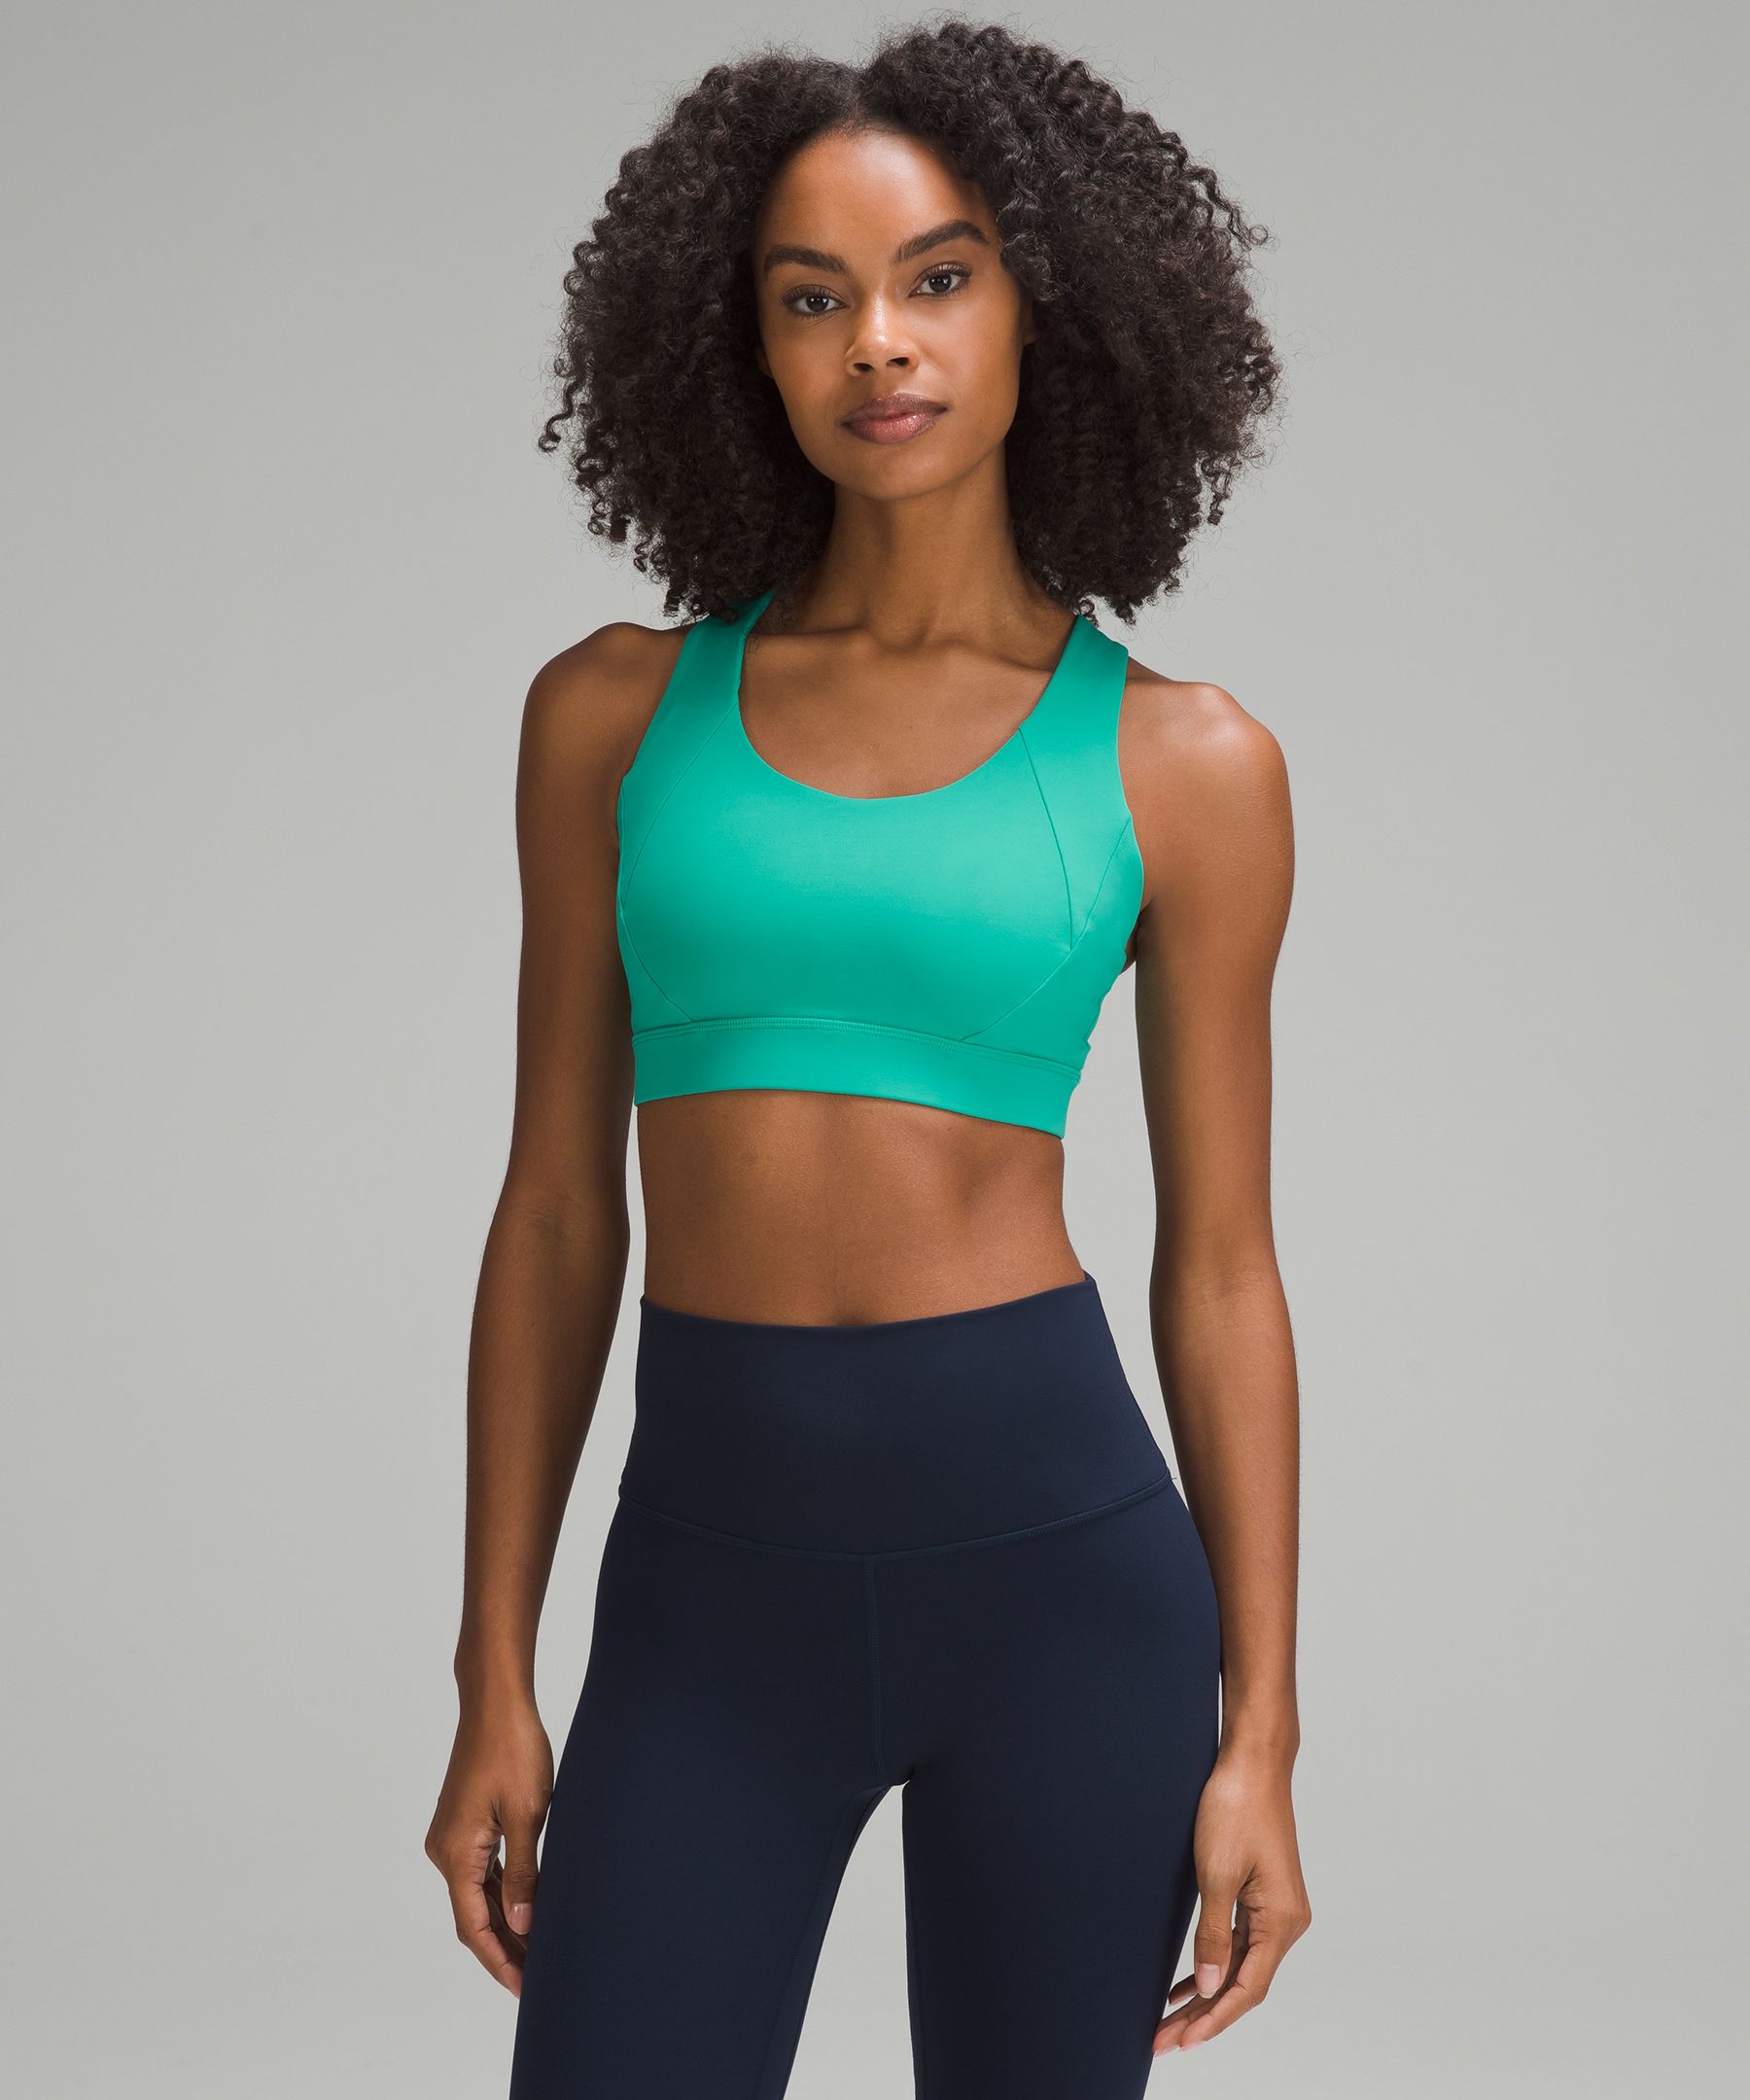 Lululemon Free To Be Elevated Bra Light Support, Dd/ddd(e) Cup In